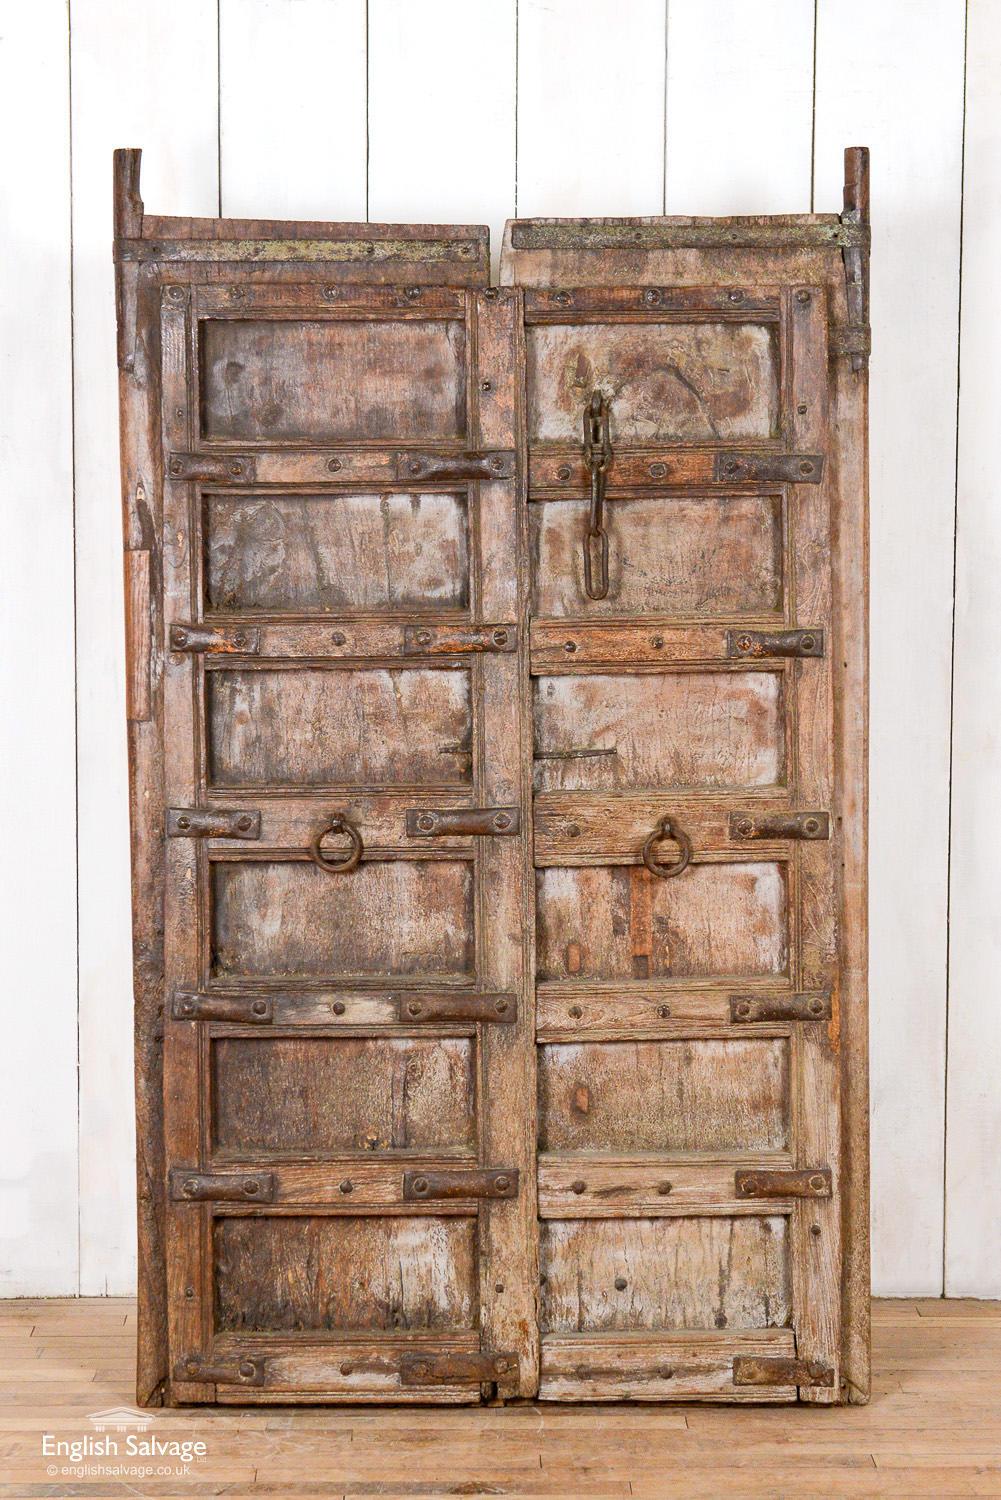 Old Indian salvaged pair of doors/panel. The doors are bared together on the back to make a single panel. These bars can be easily removed. Lovely old metal work remains on the doors. Scrapes, splits, repairs commensurate with age.